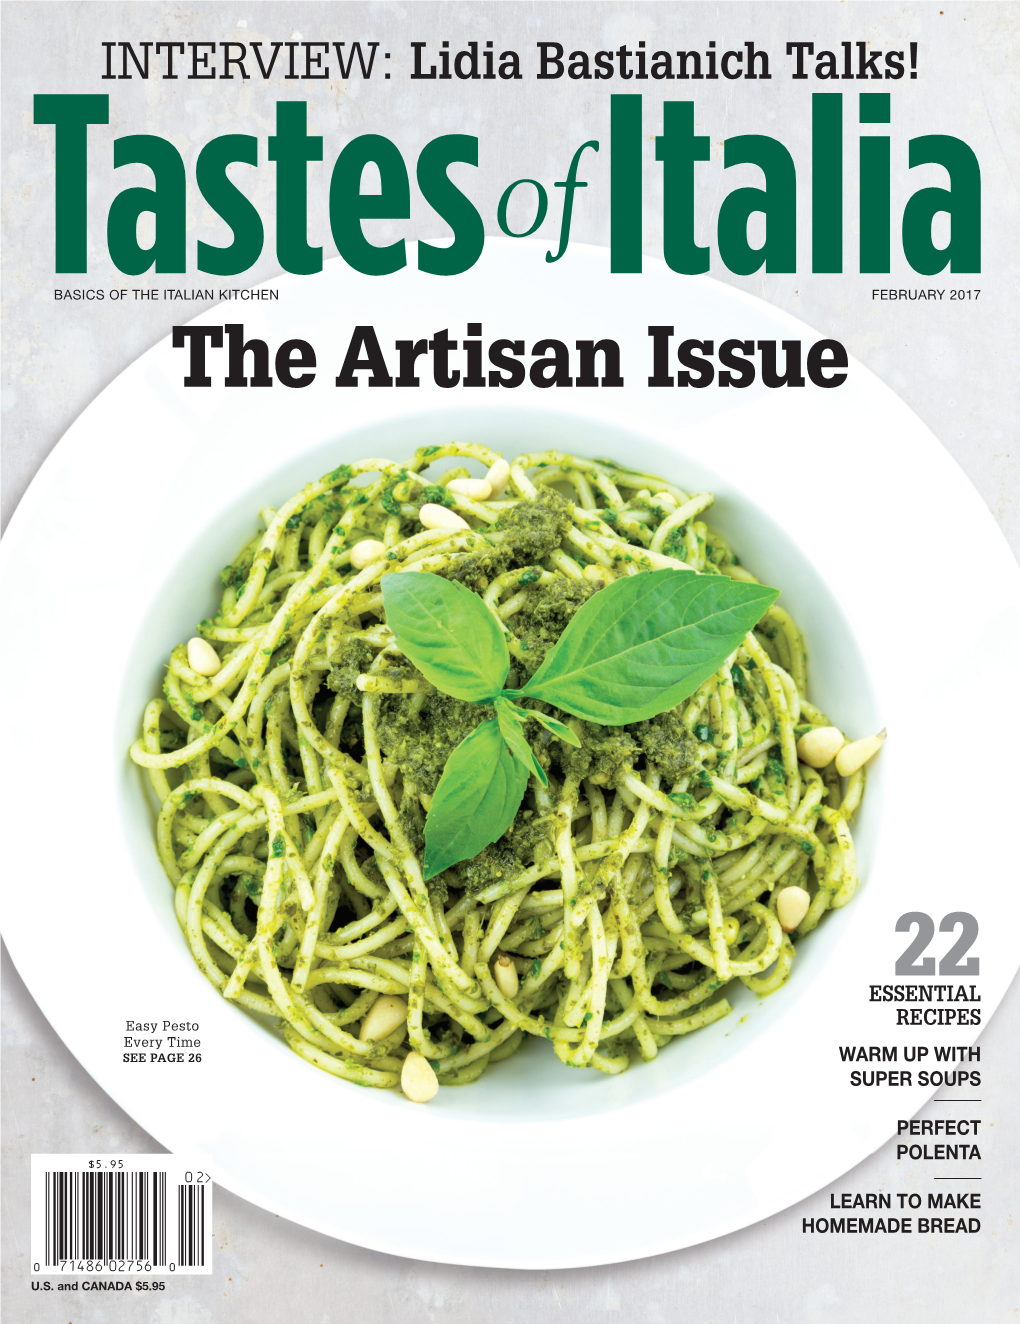 The Artisan Issue